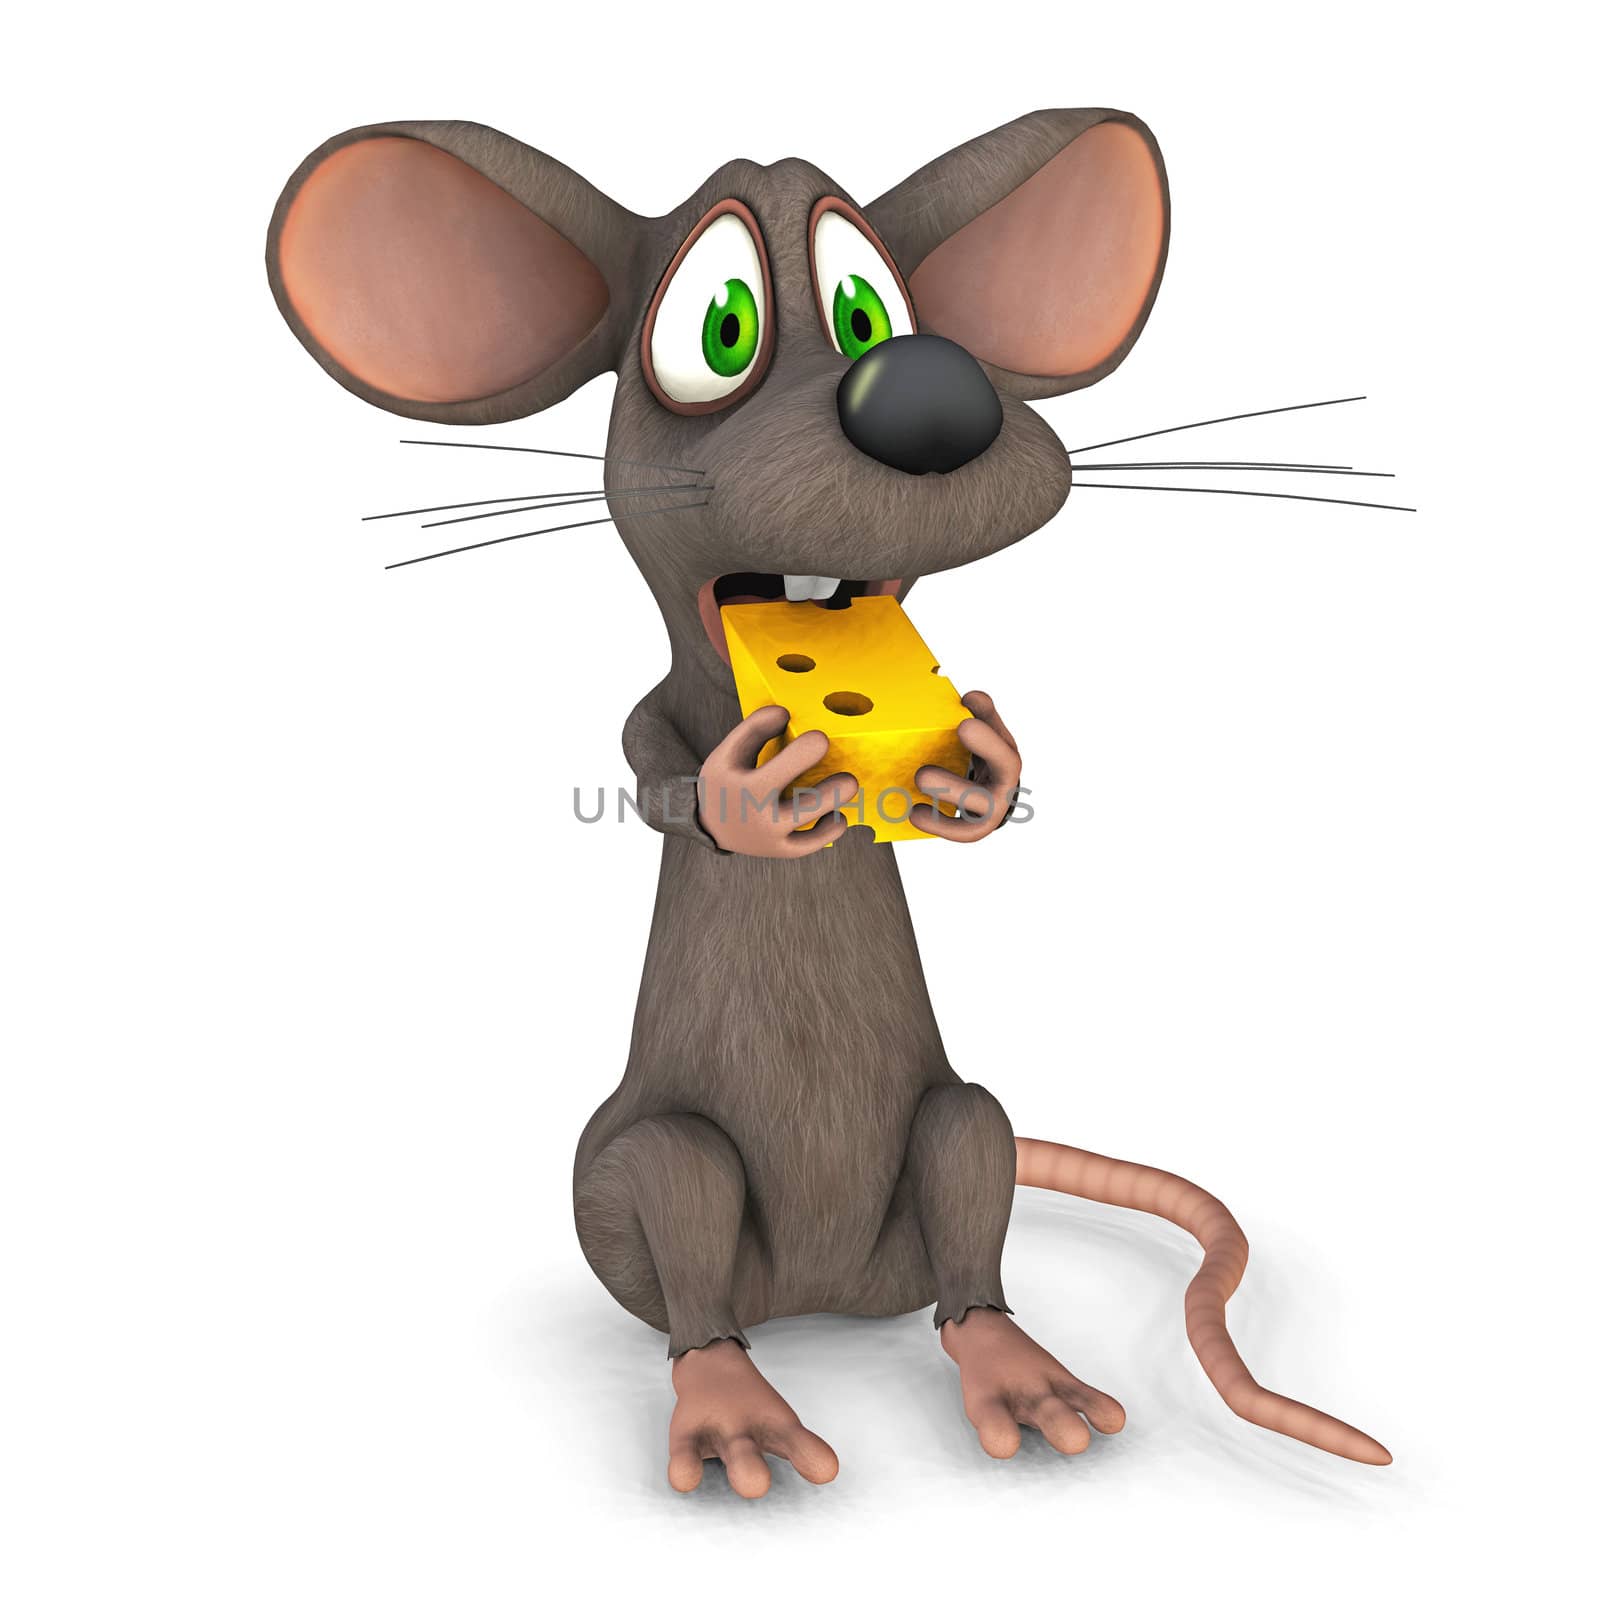 3d render of a toon mouse